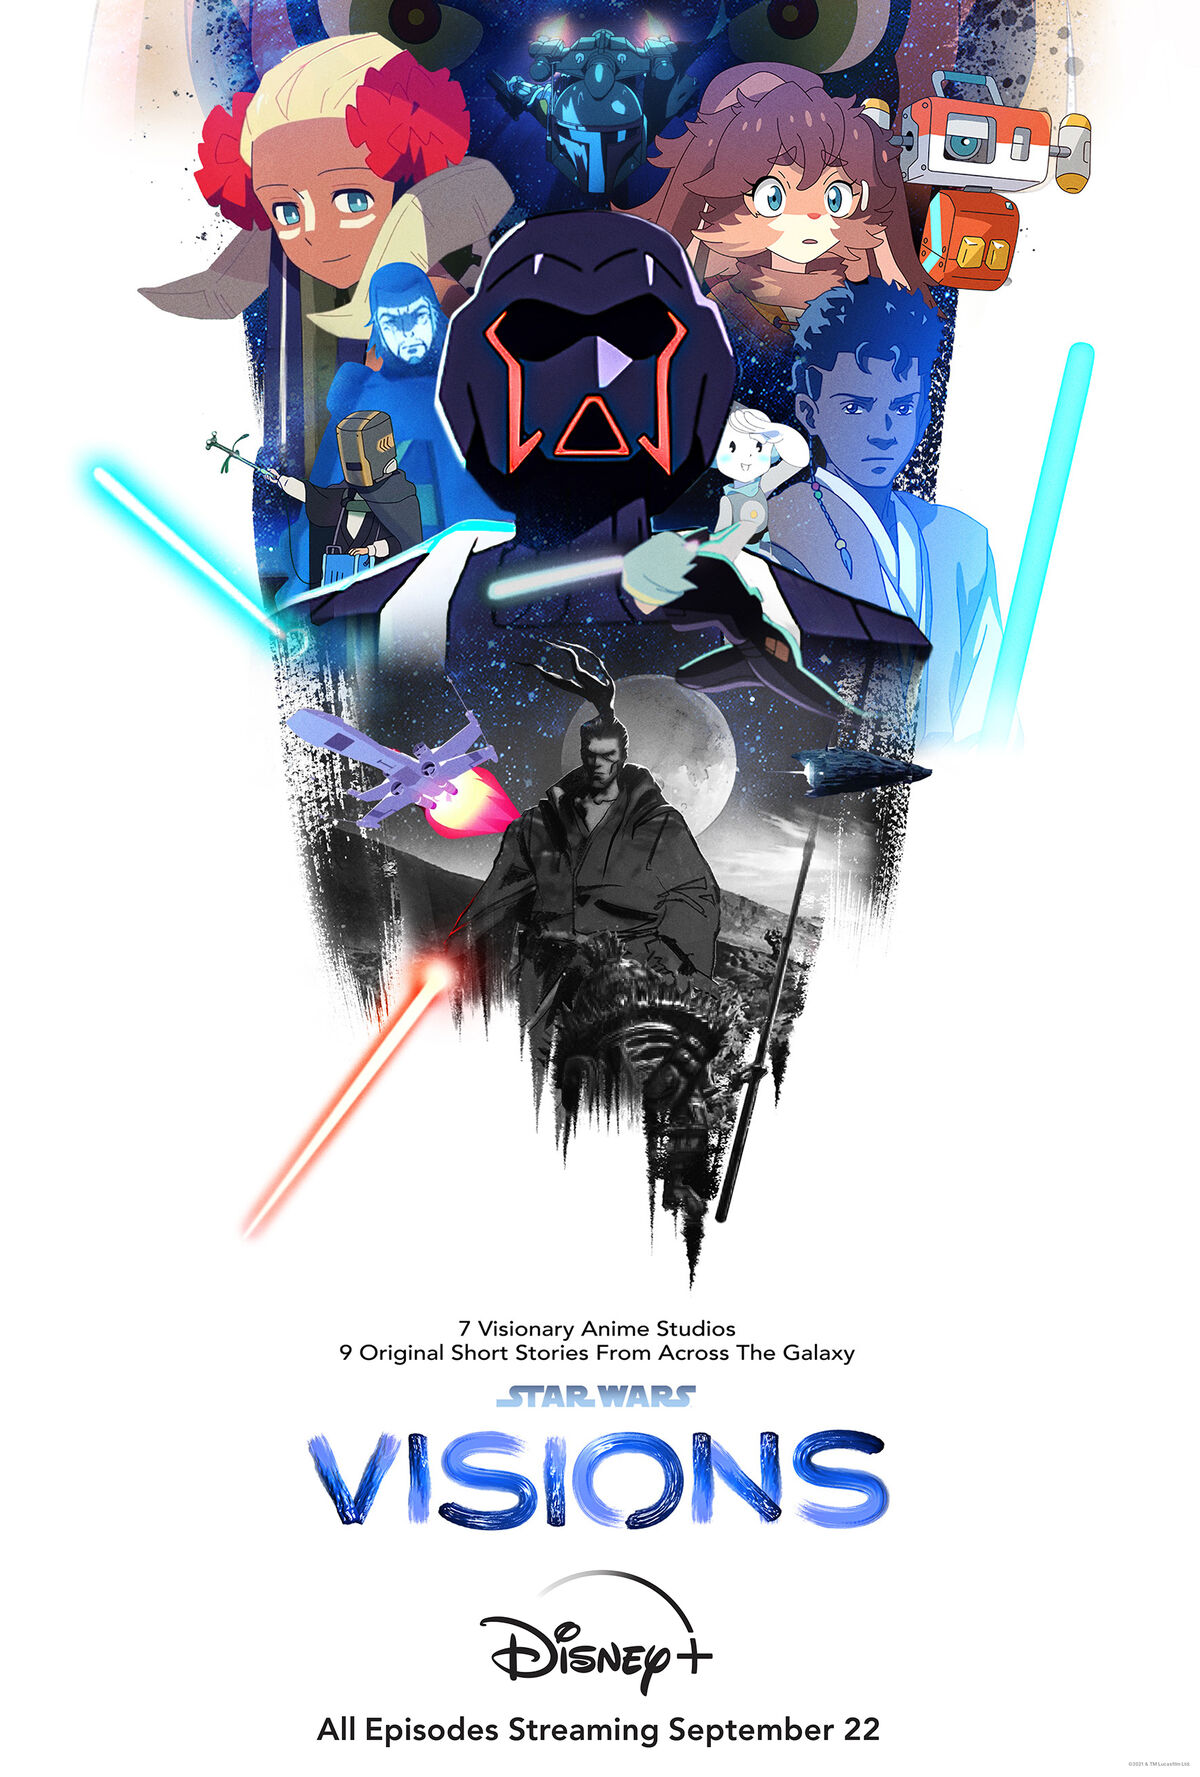 Star Wars: Visions' director tells a Sith ghost story (exclusive)